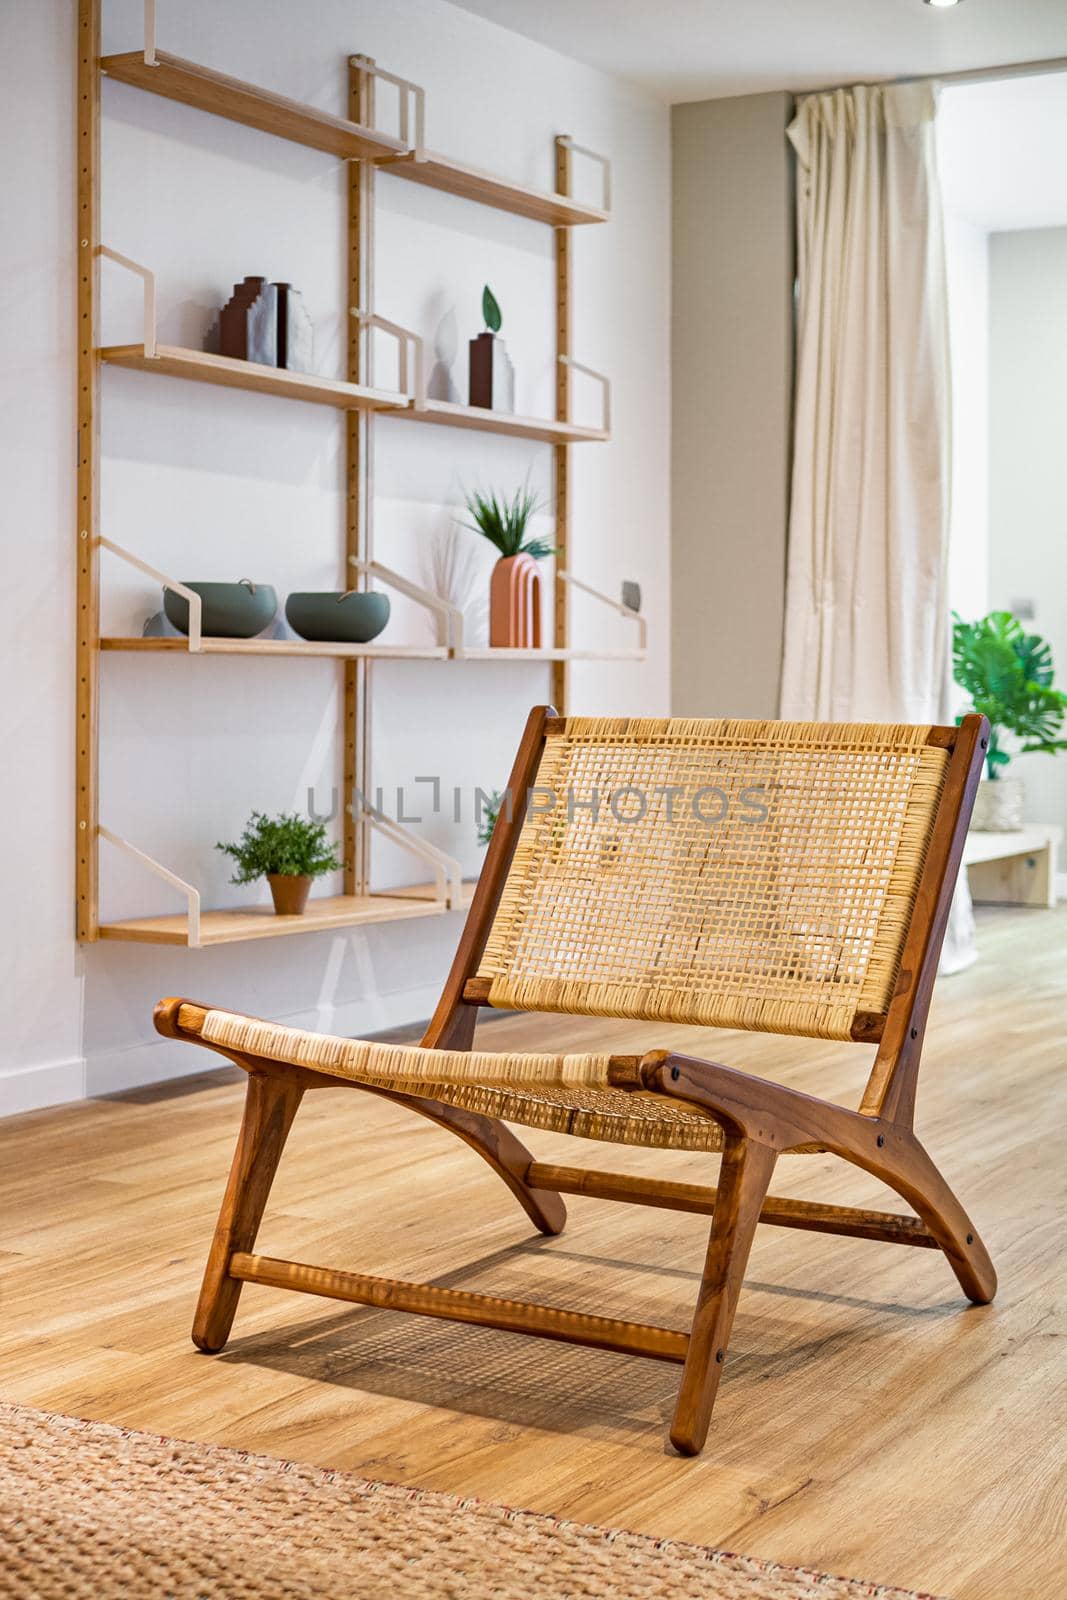 Modern wicker chair standing in living room with gray wall and shelves with decorations and plants. Interior wooden furniture.